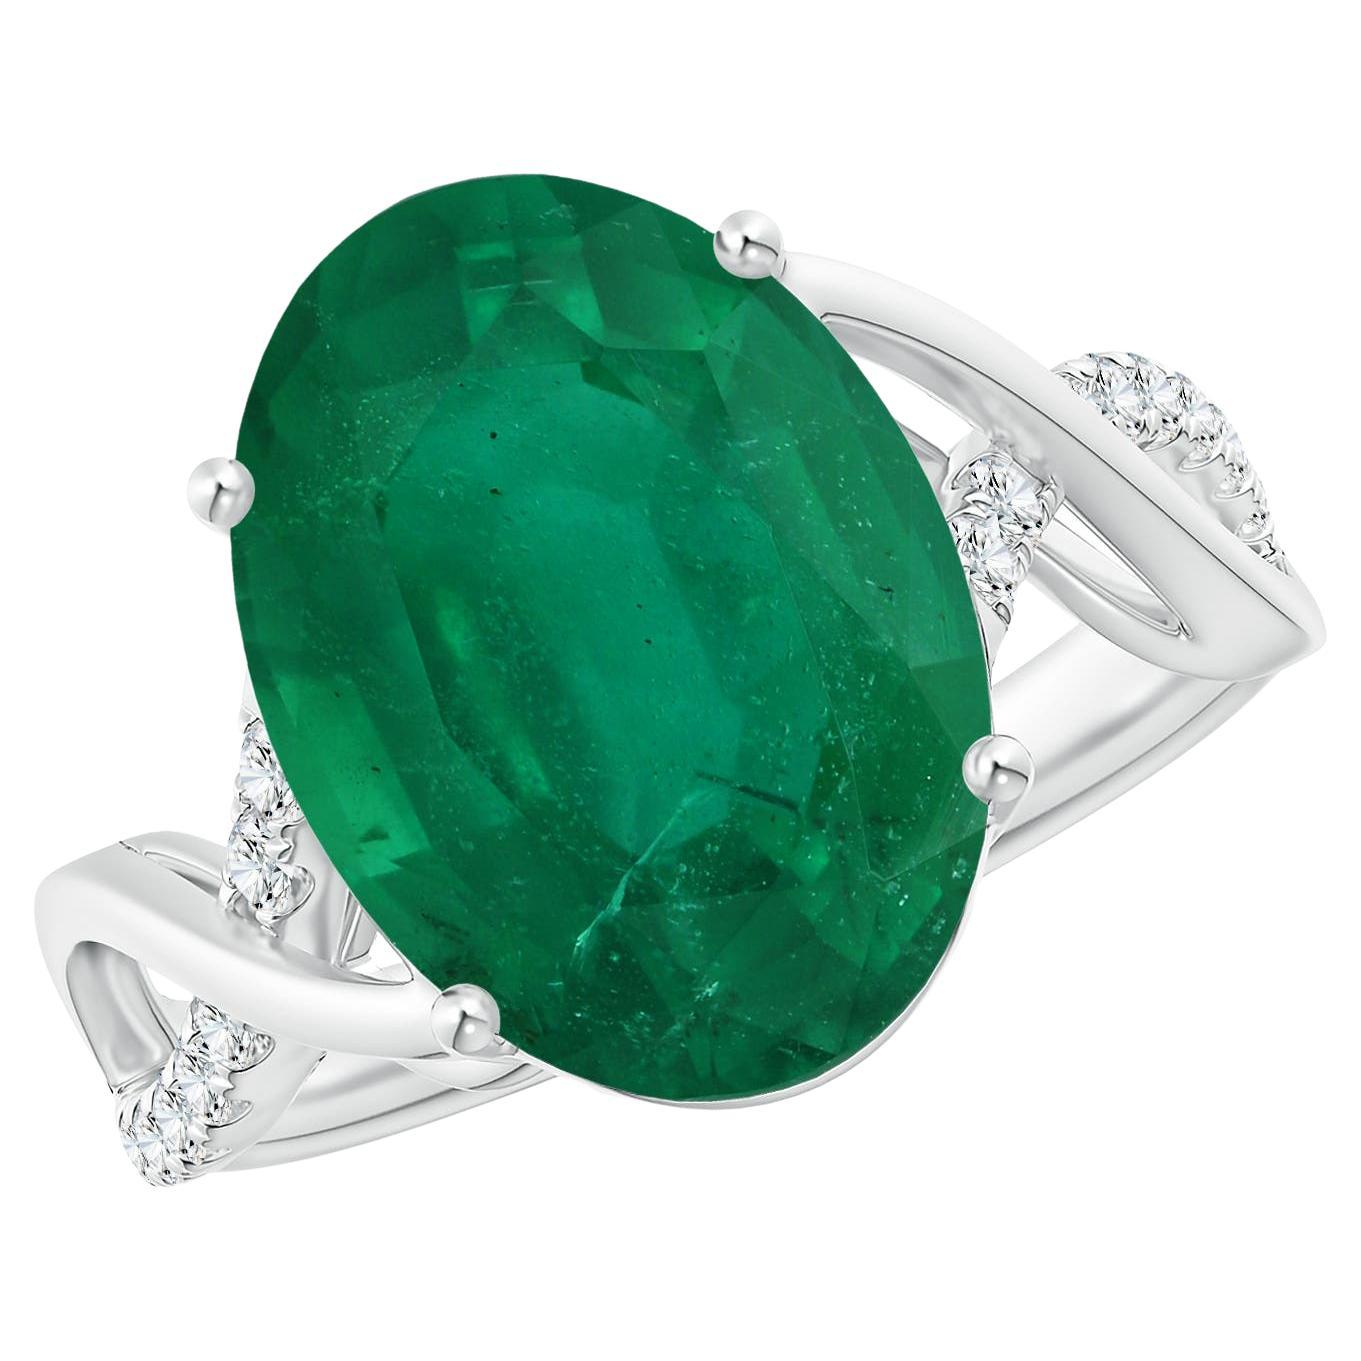 For Sale:  Angara Gia Certified Natural Emerald Crossover Ring in White Gold